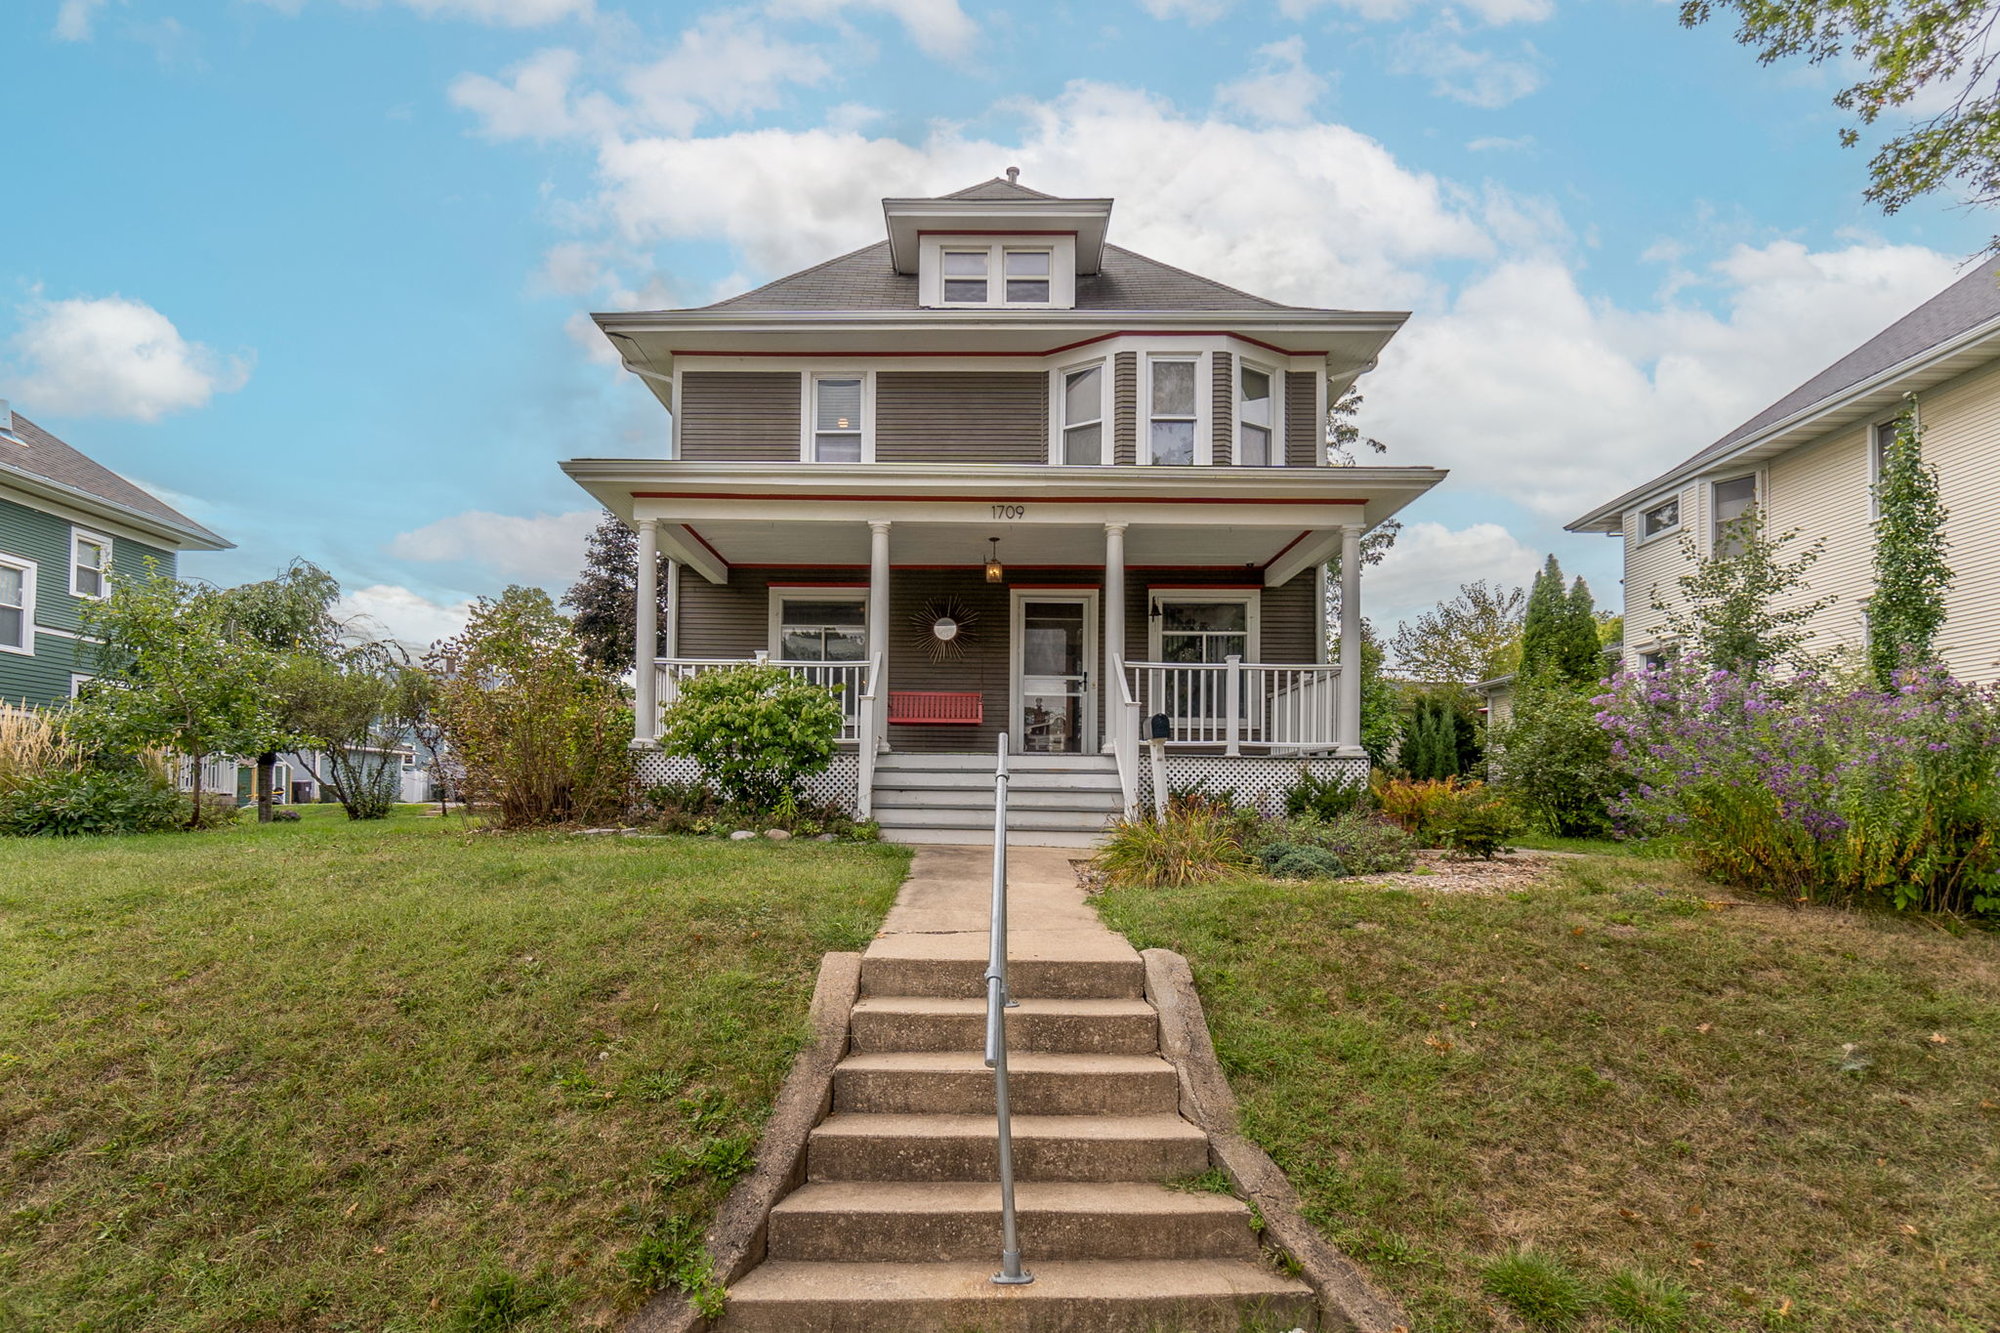 Character Filled Home in Walking Distance to Downtown Cedar Falls